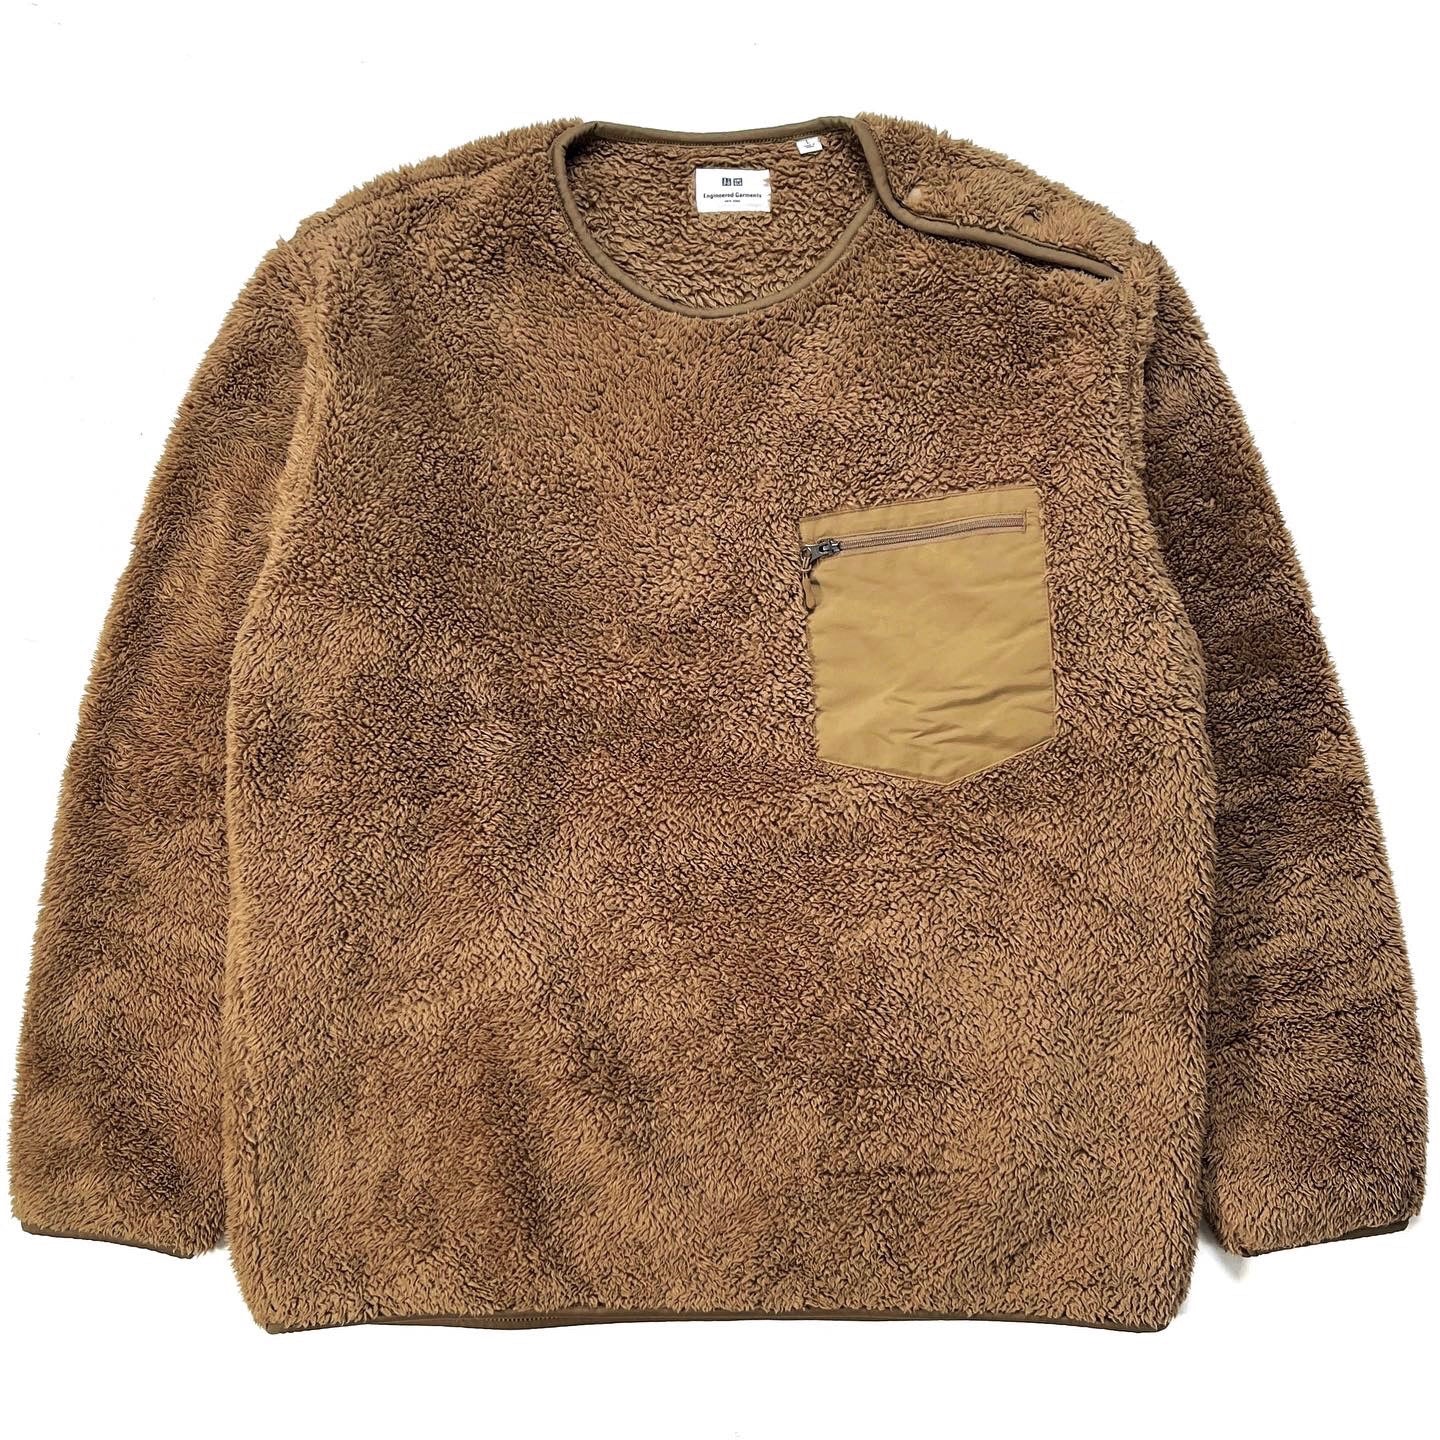 2019 Uniqlo X Engineered Garments High-Pile Fleece Pullover, Brown (L)